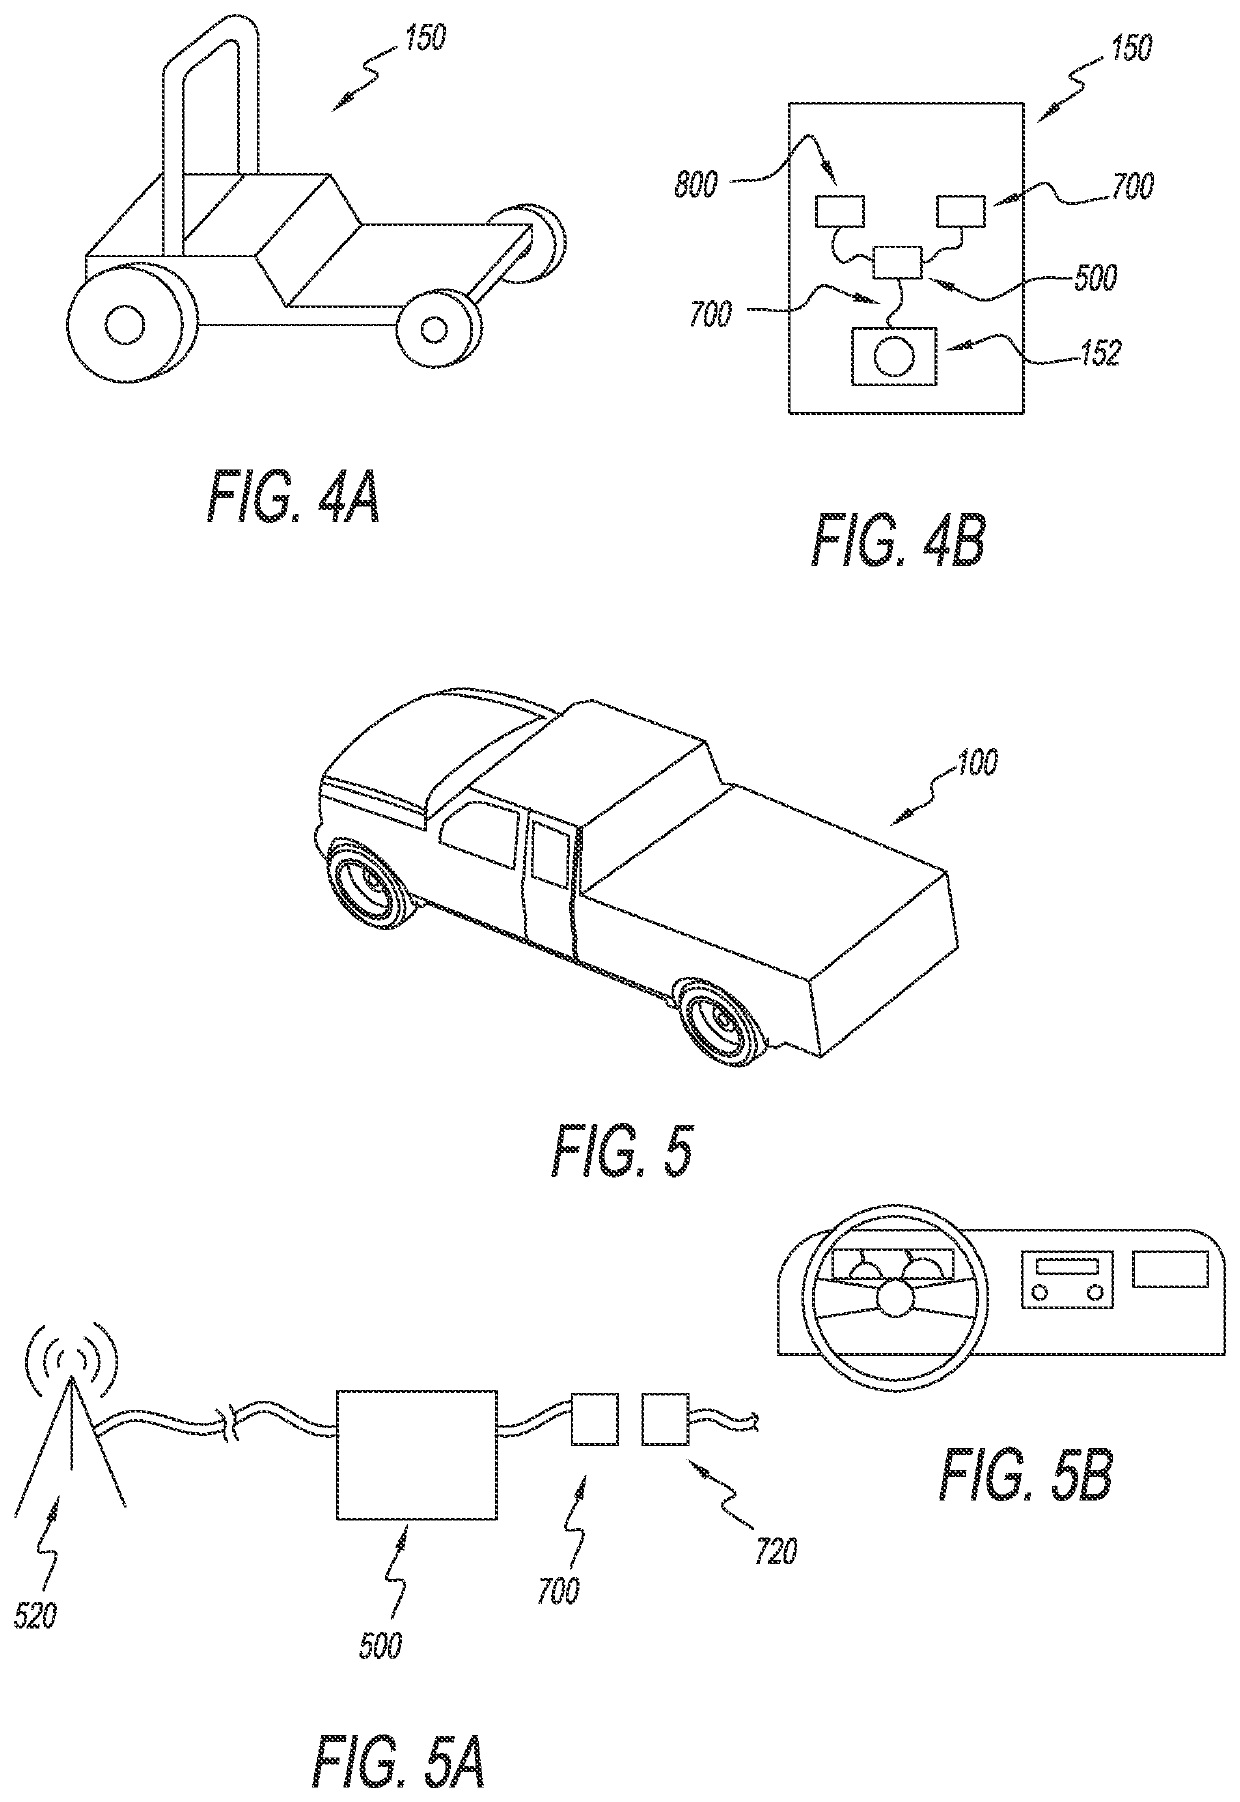 Communication device for managing one or more aspects of a vehicle through remote monitoring